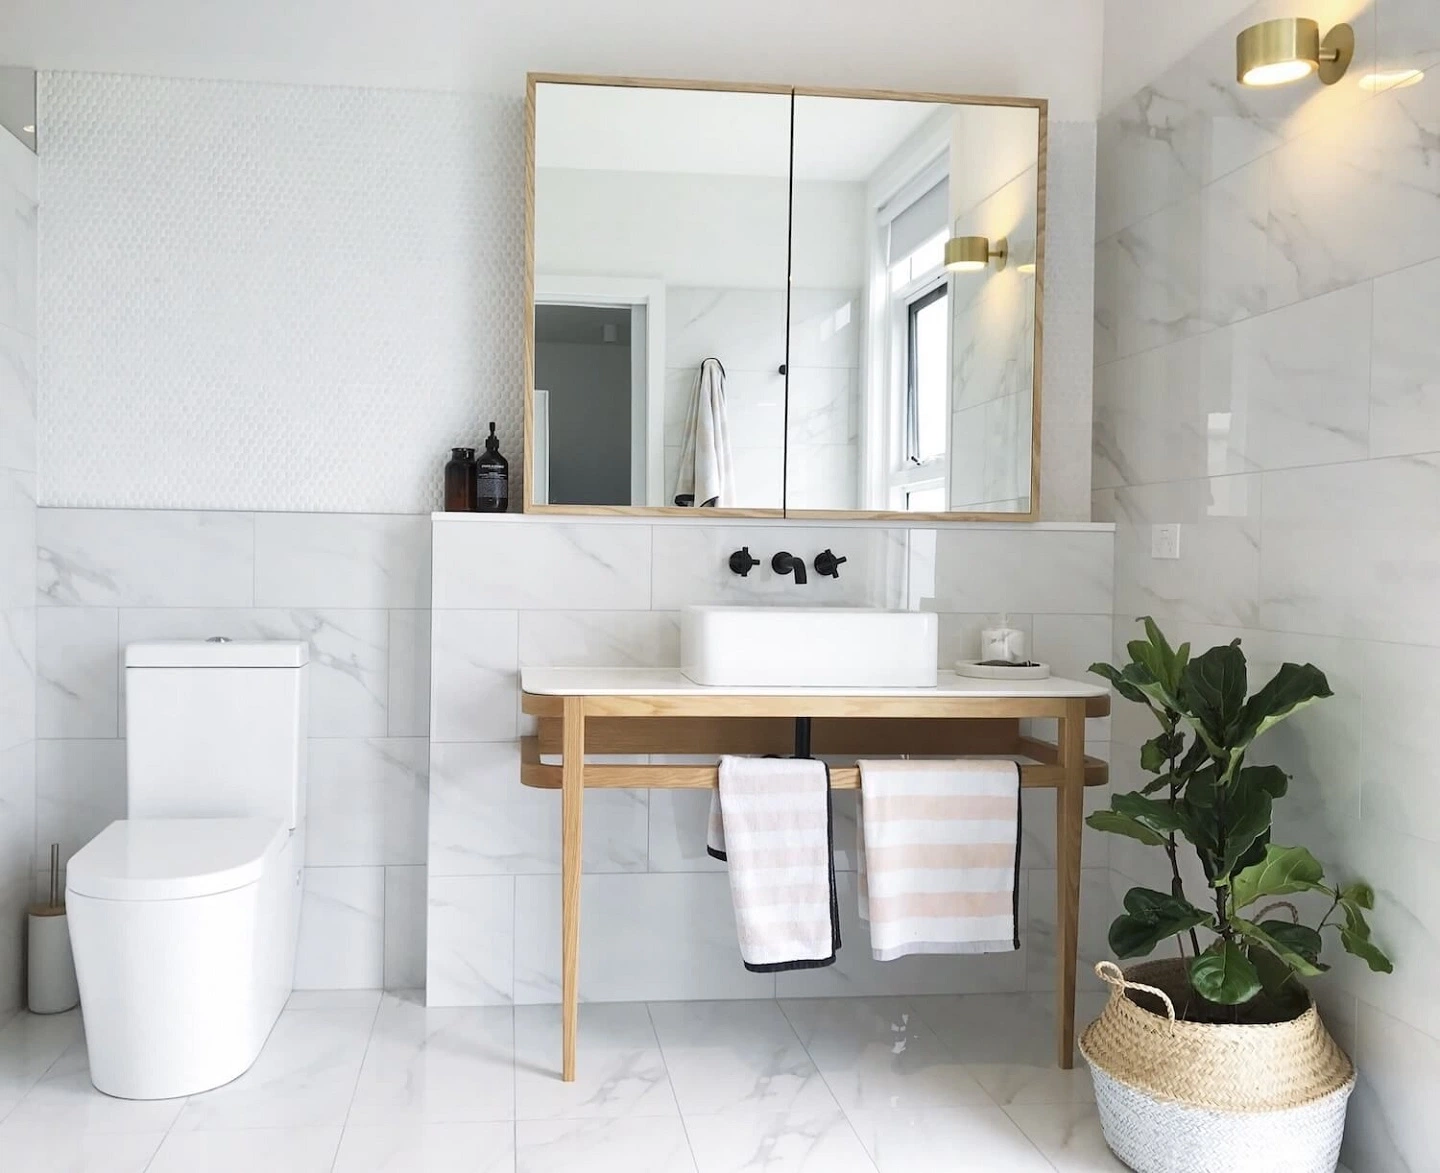 What should we pay attention to when choosing bathroom accessories?